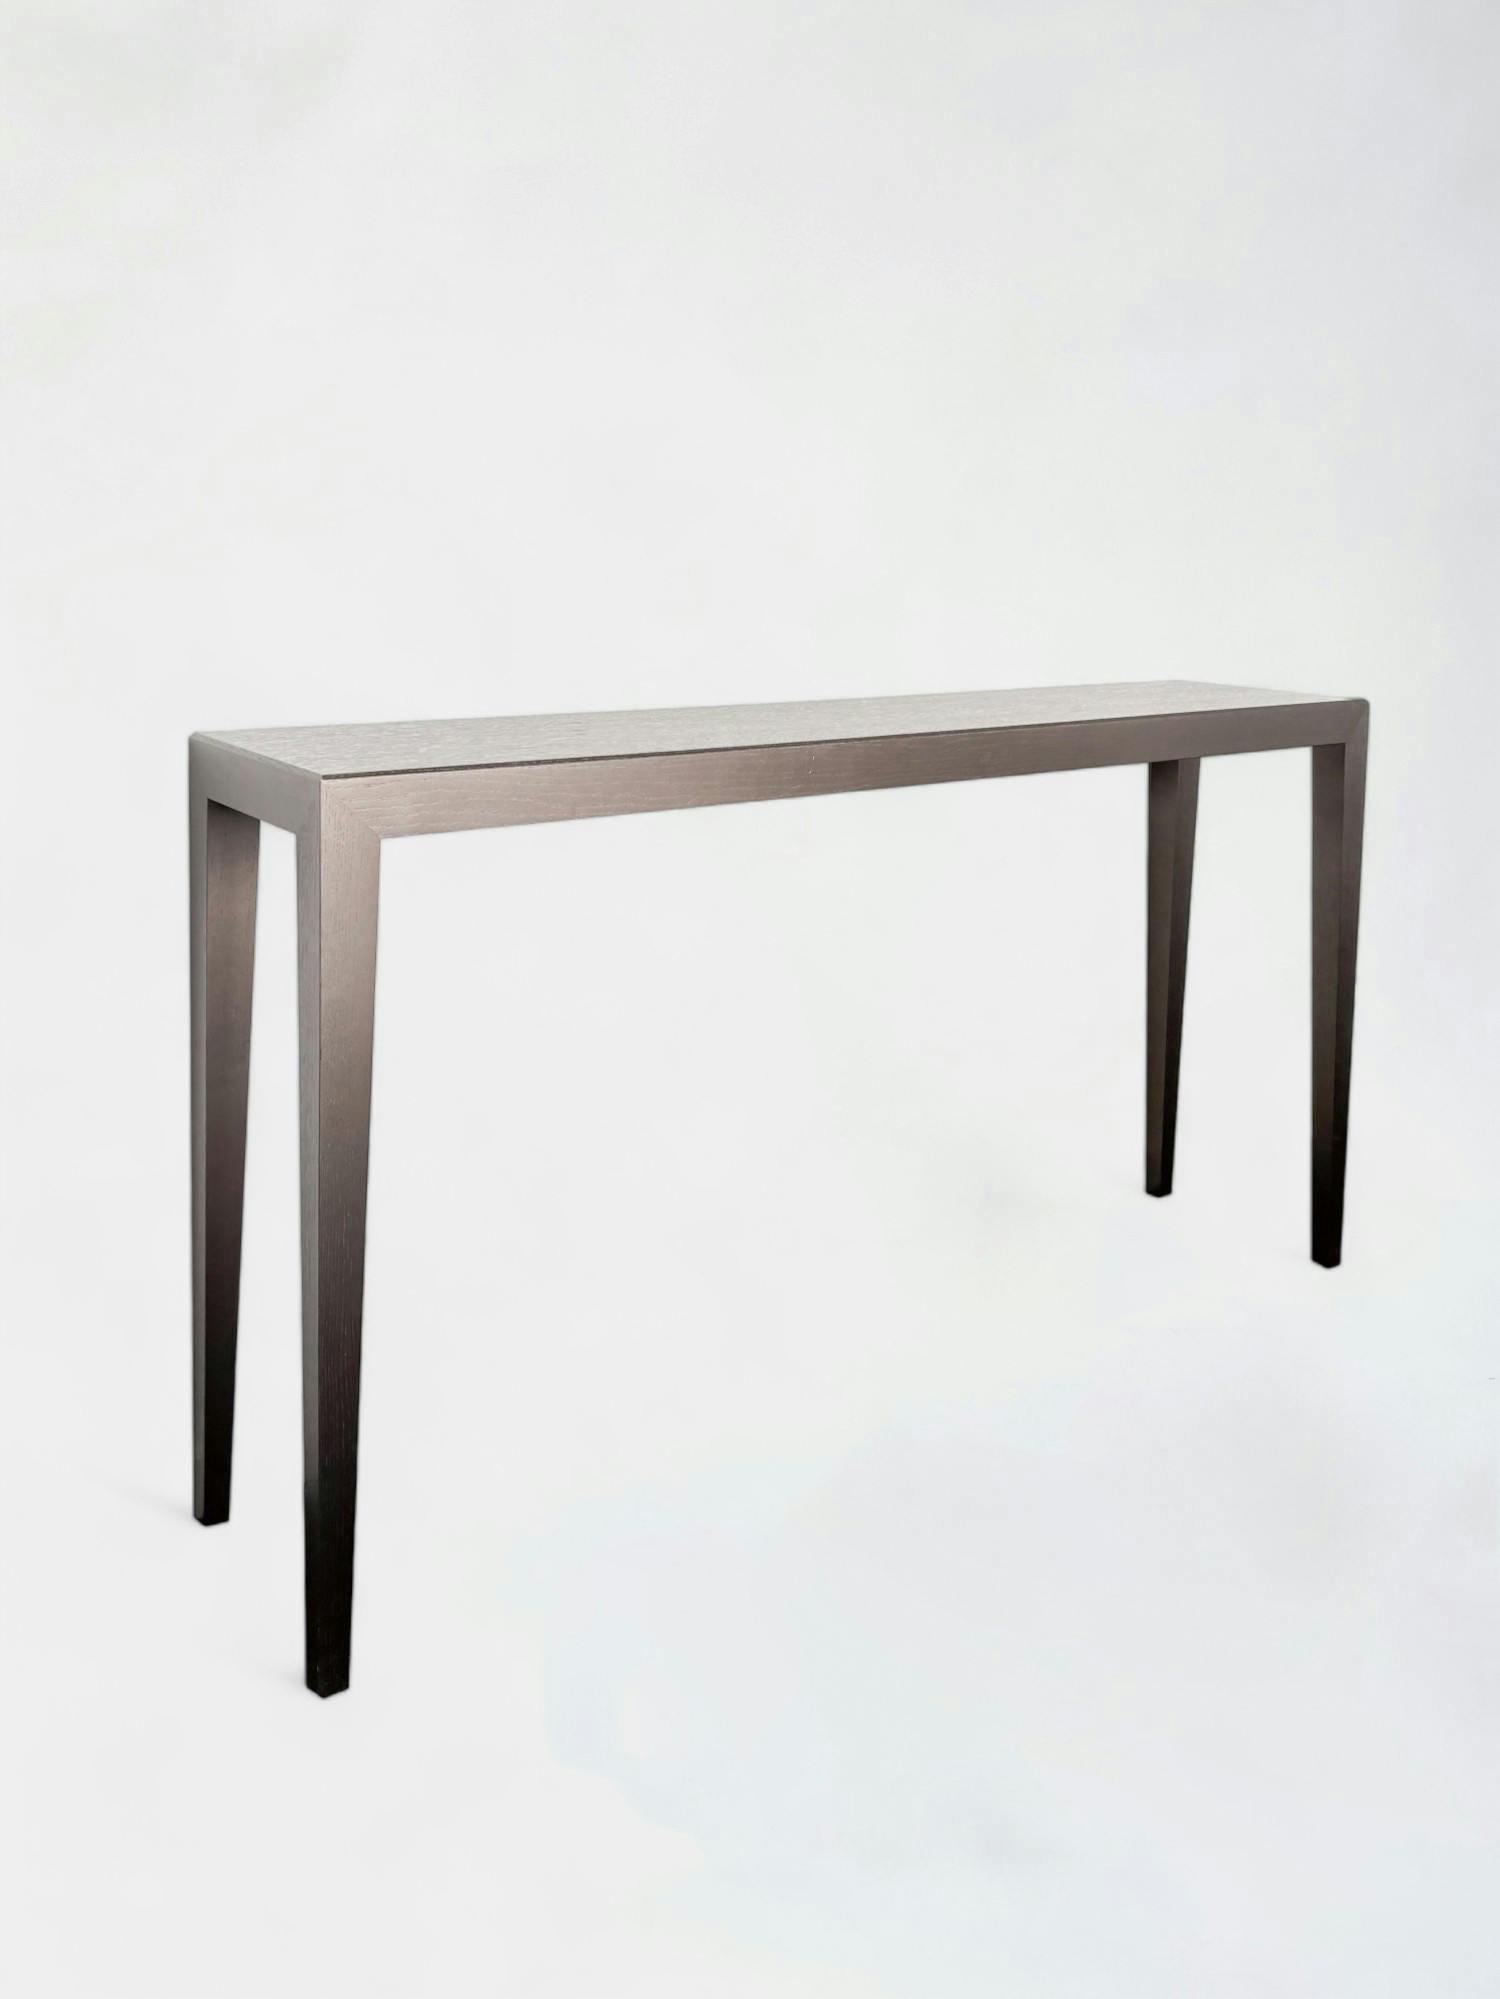 Dark Brown Wooden Console Table with Sleek Design - Relieve Furniture